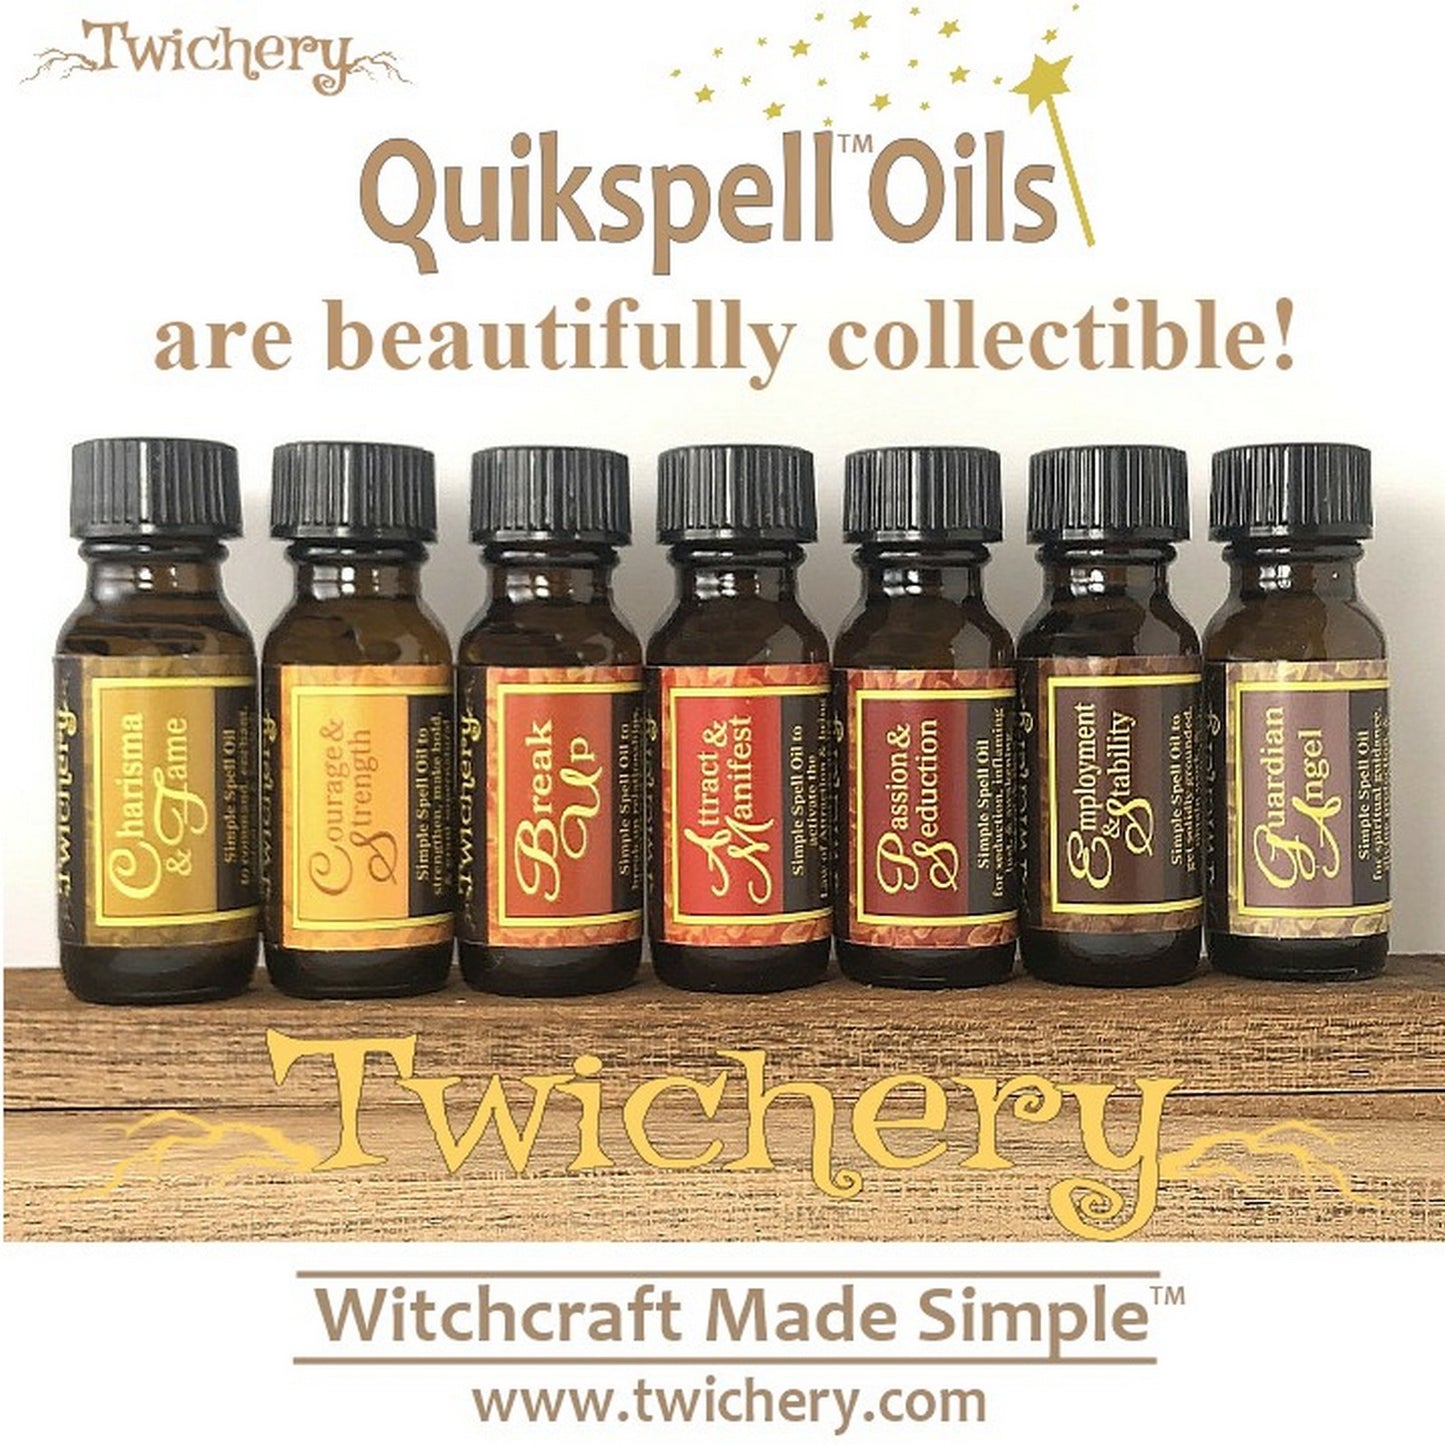 Collect all 24 Twichery Quikspell Oils for all your magickal needs, including major mojo boosting! Hoodoo, Voodoo, Wicca, Witchcraft Made Simple